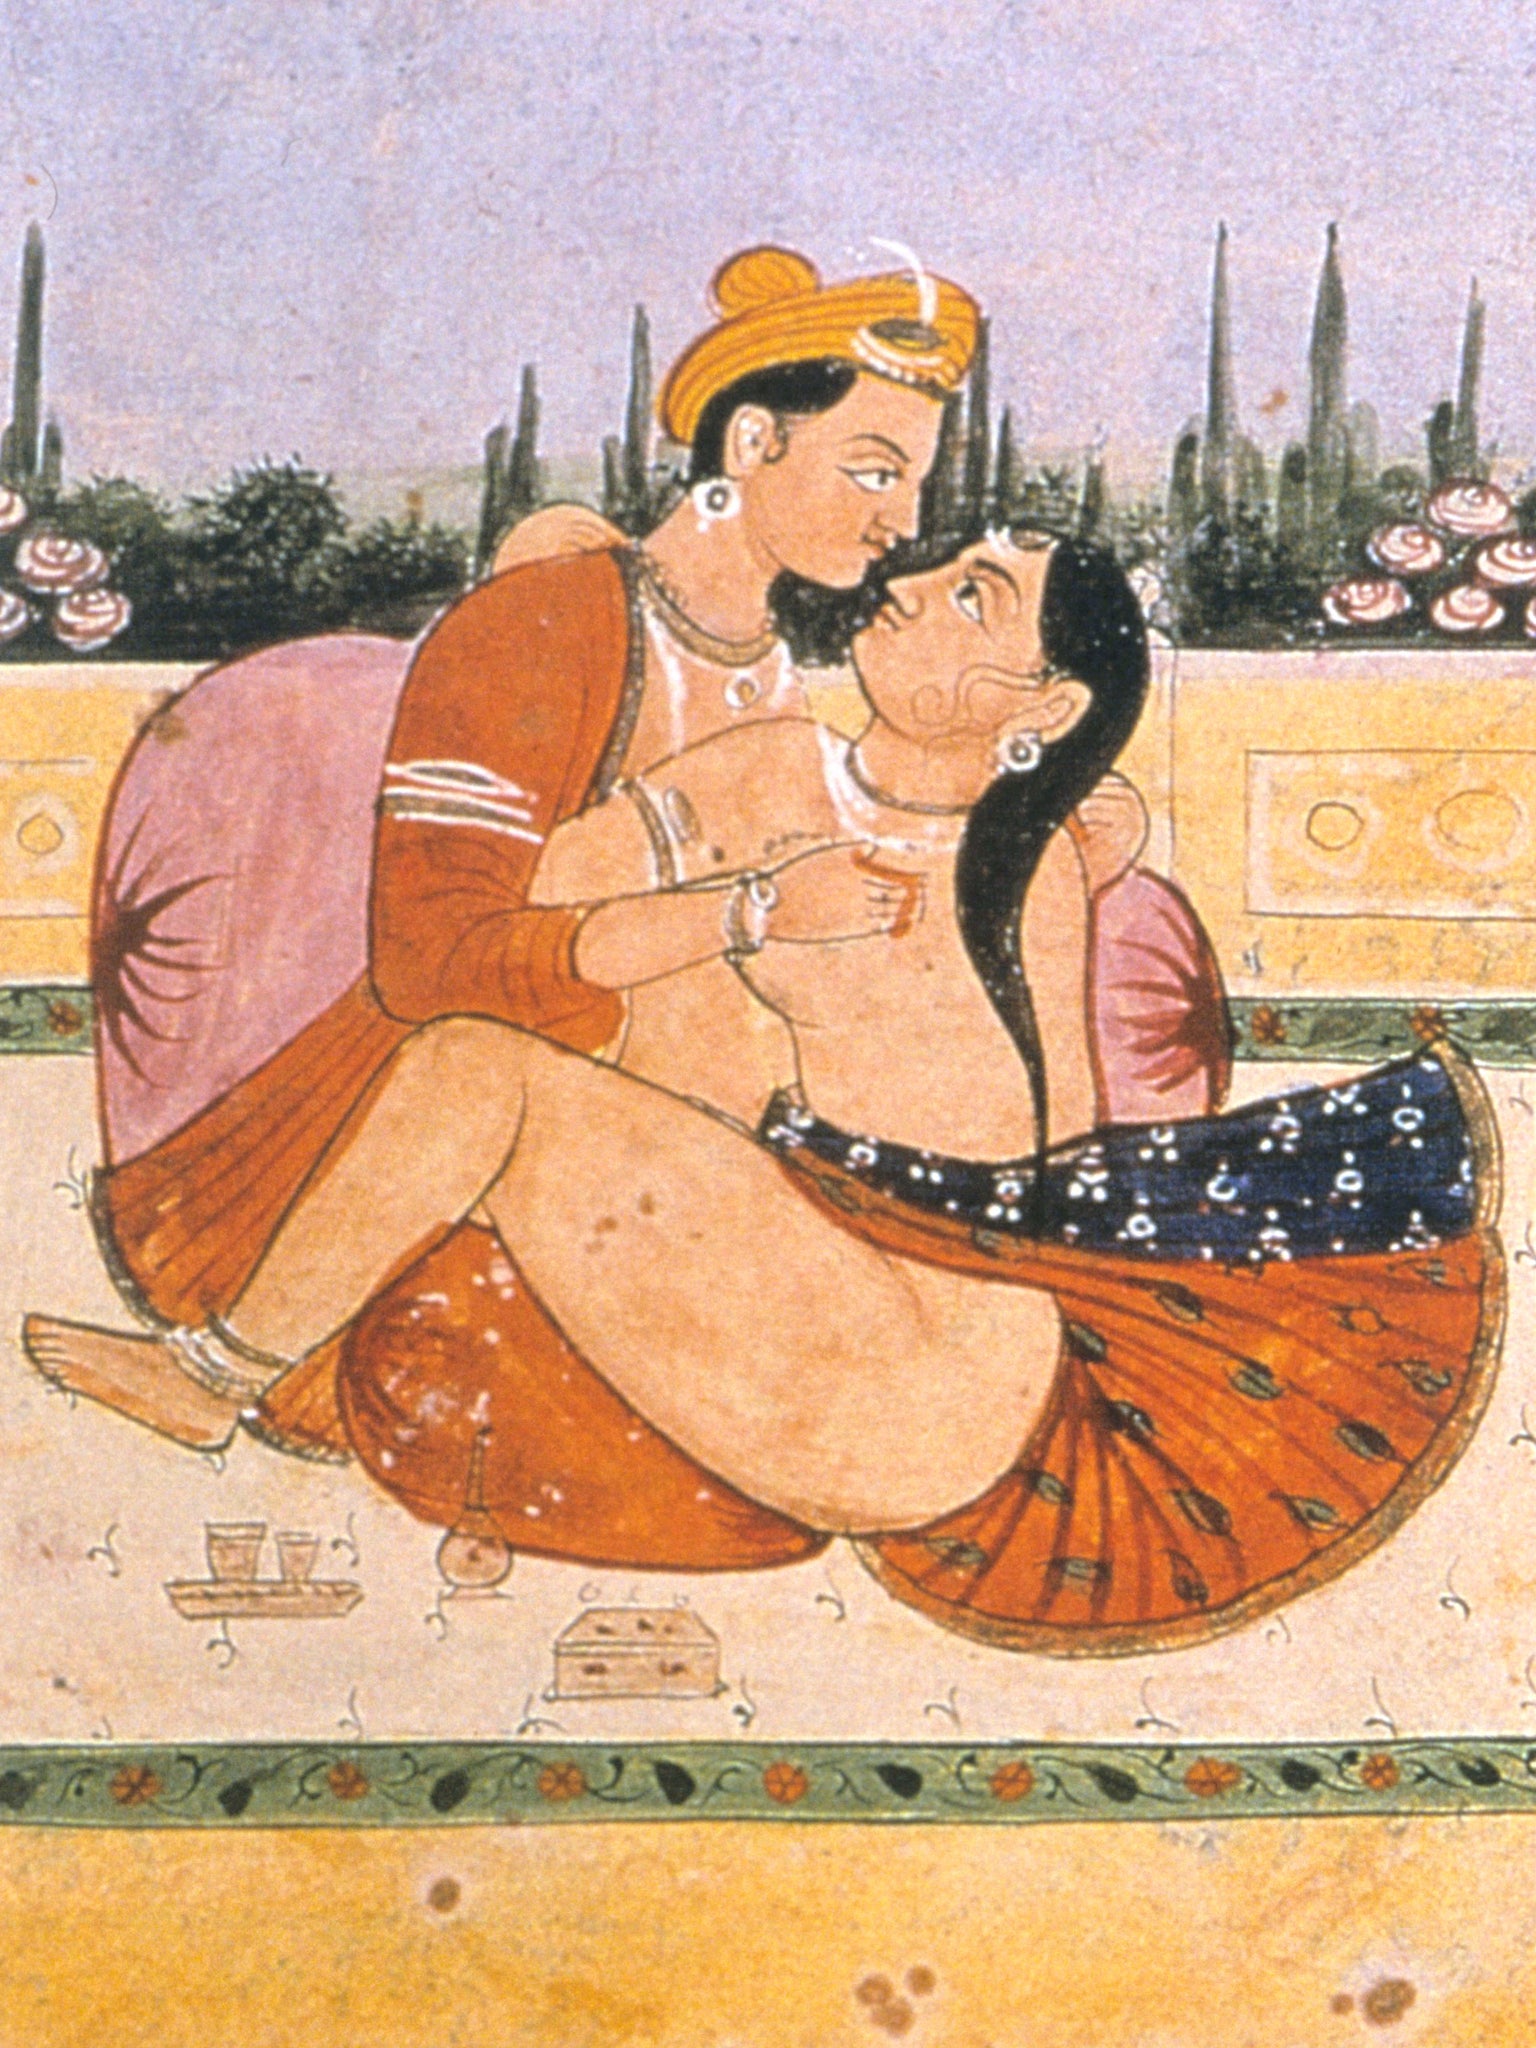 Kama Sutra sexed up with app that lets readers study poses in 3D on.